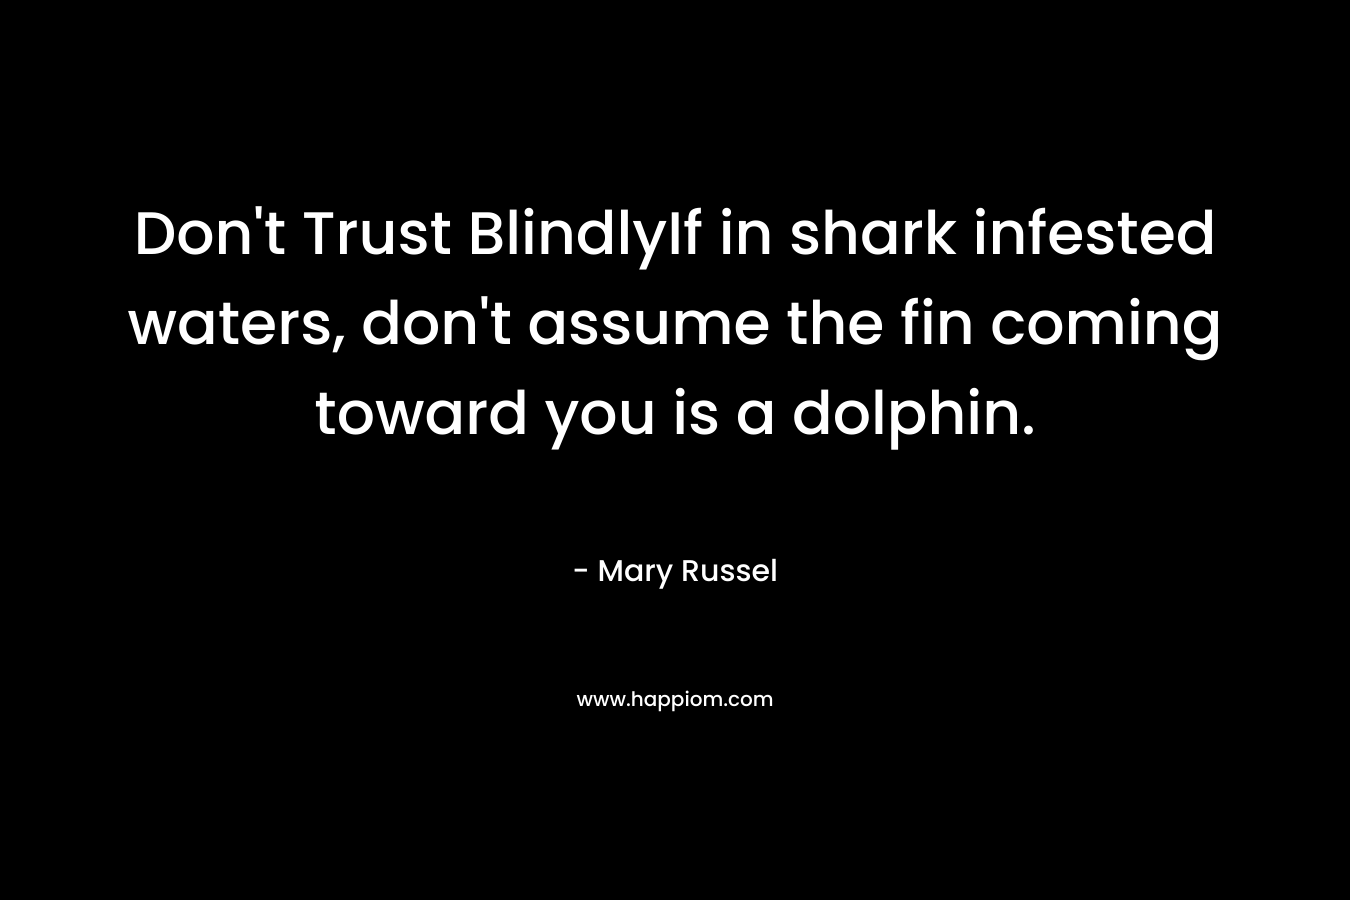 Don't Trust BlindlyIf in shark infested waters, don't assume the fin coming toward you is a dolphin.